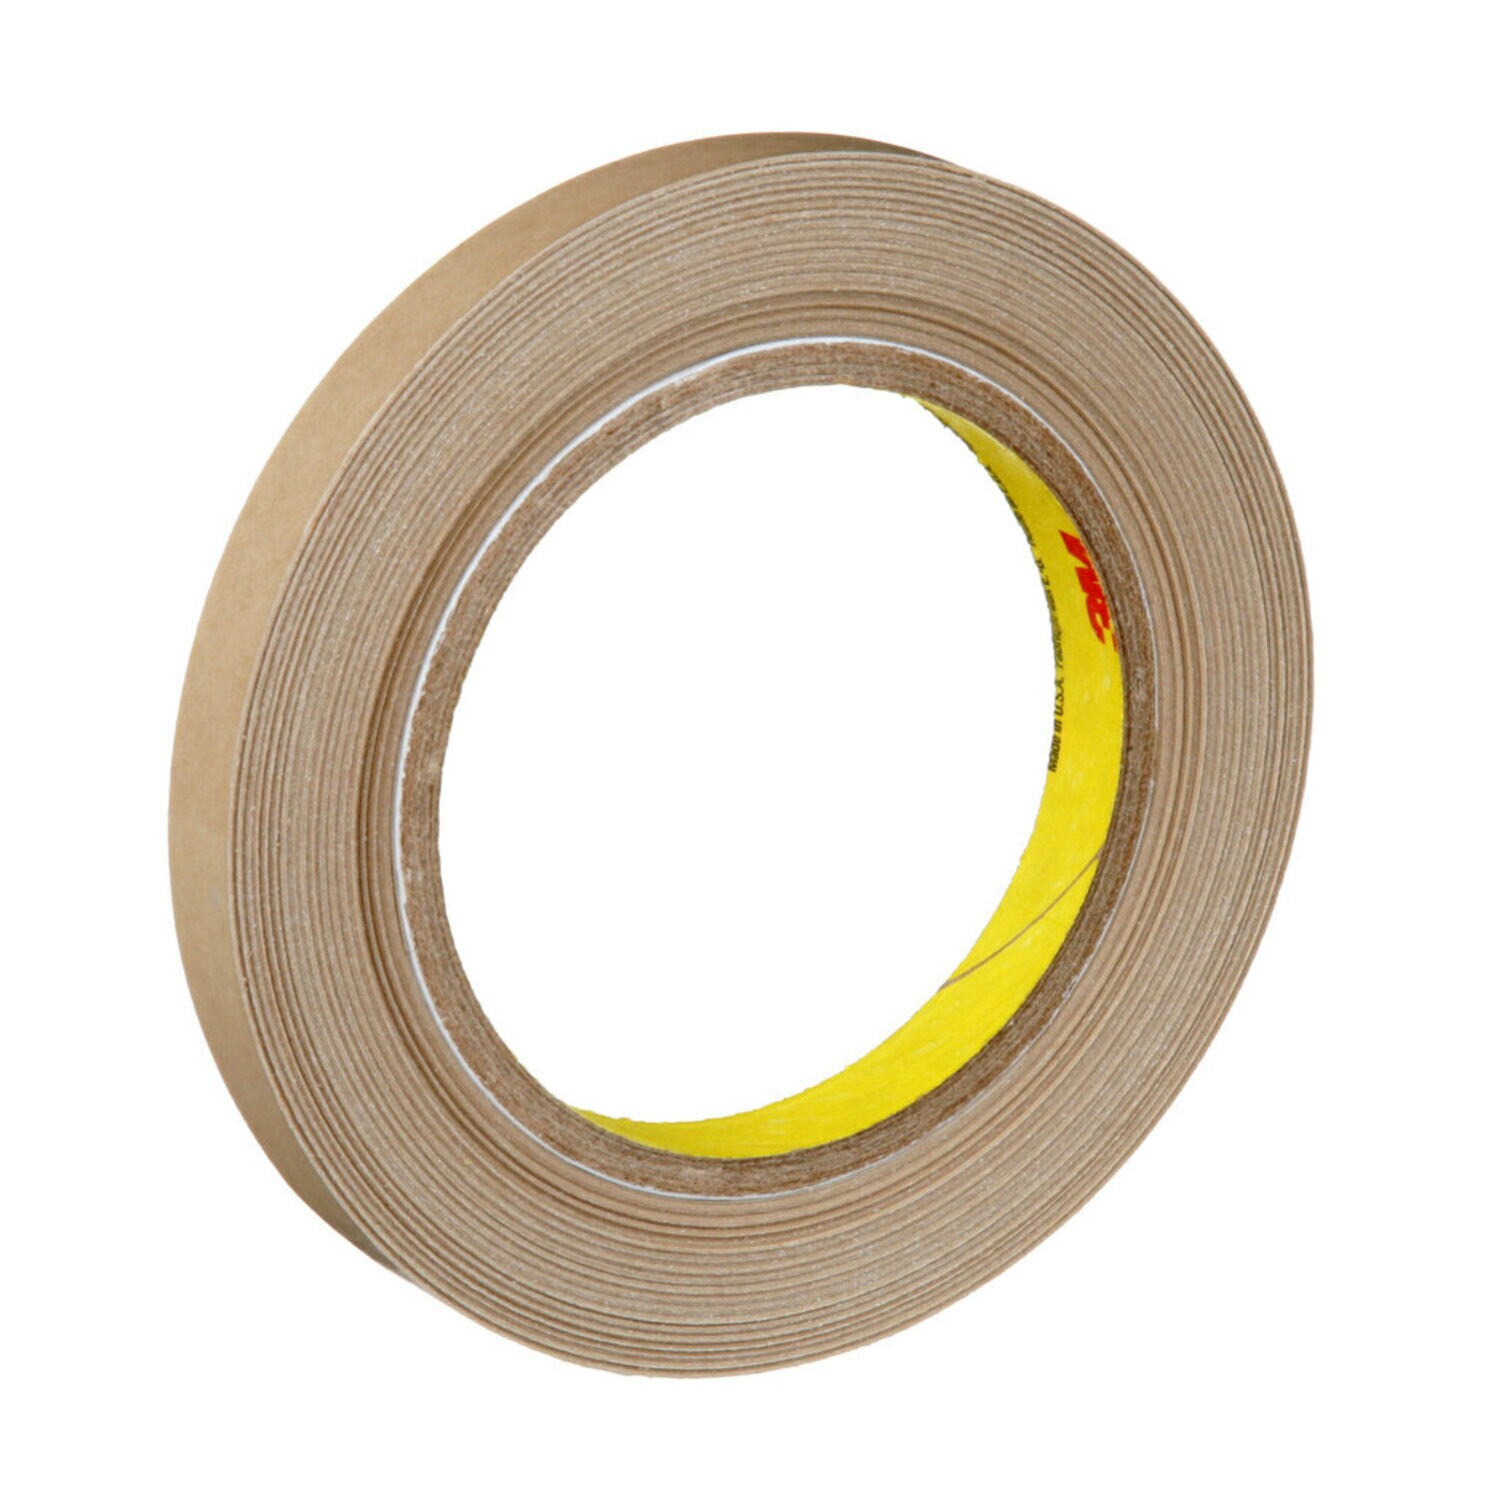 7010373830 - 3M Electrically Conductive Adhesive Transfer Tape 9703, 1/2 in x 36 yd,
18 rolls per case Bulk